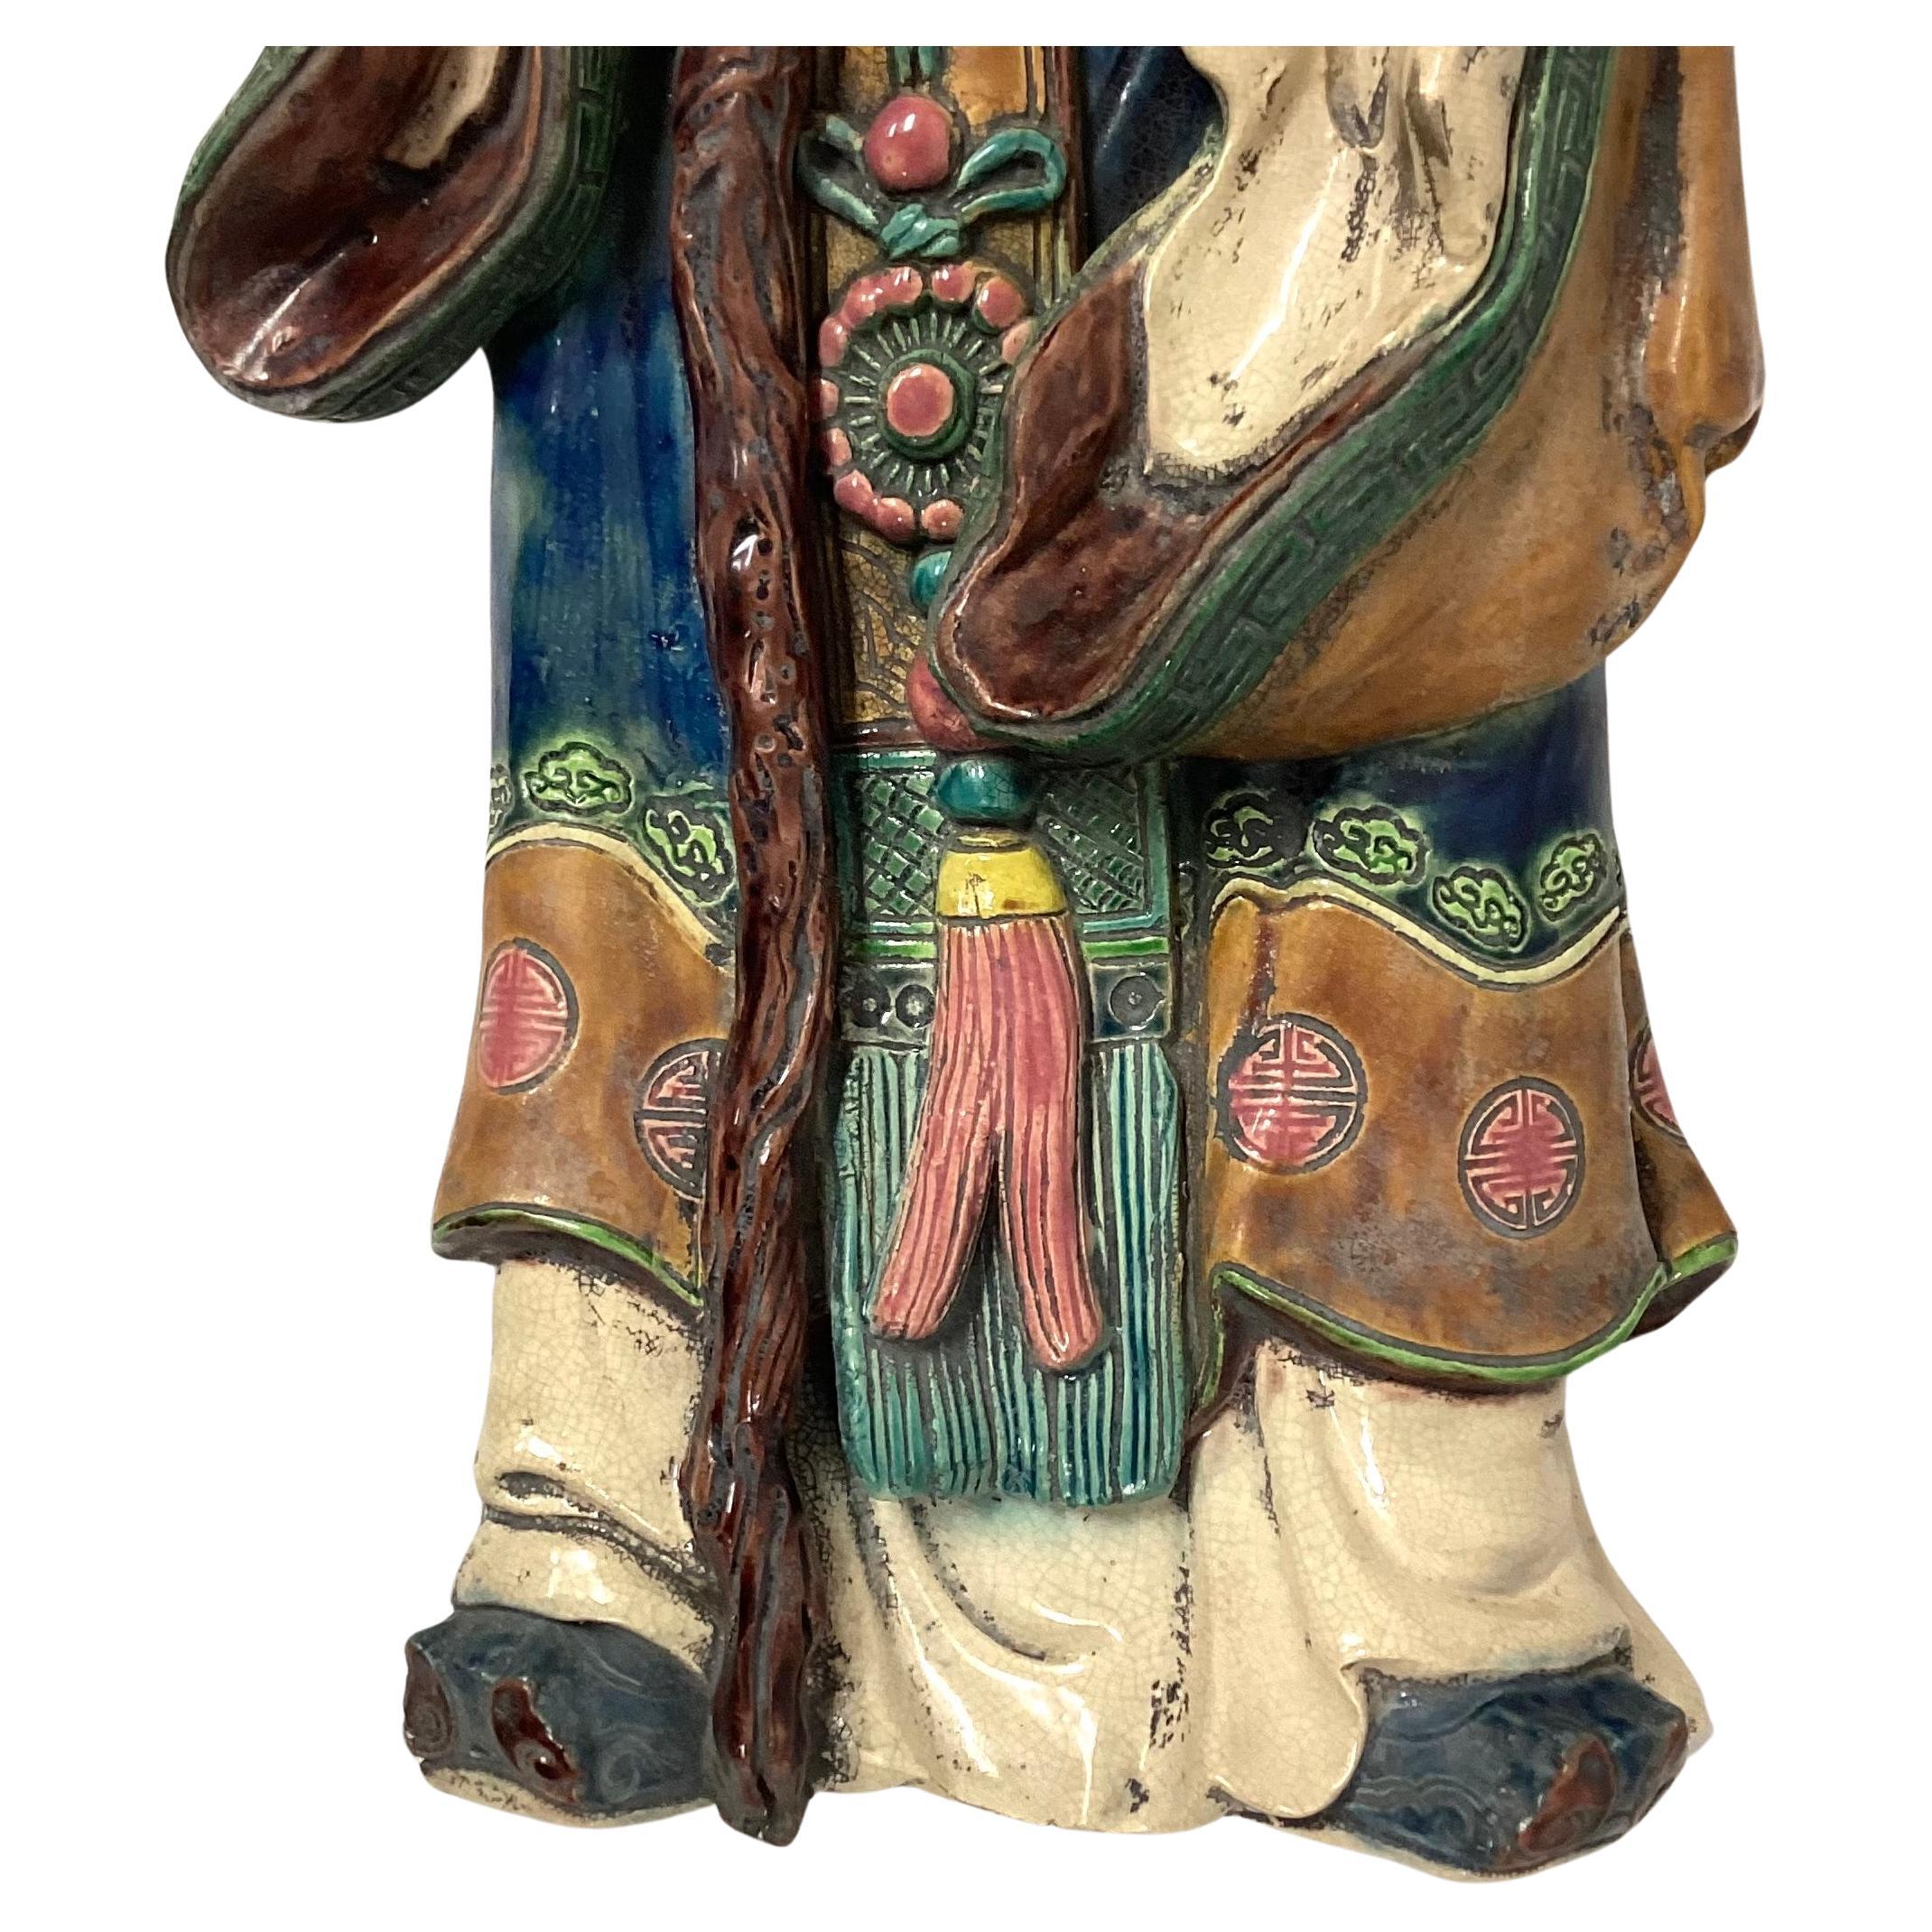 Chinese Sage Porcelain Man Statue Wall Hanging In Good Condition For Sale In Bradenton, FL